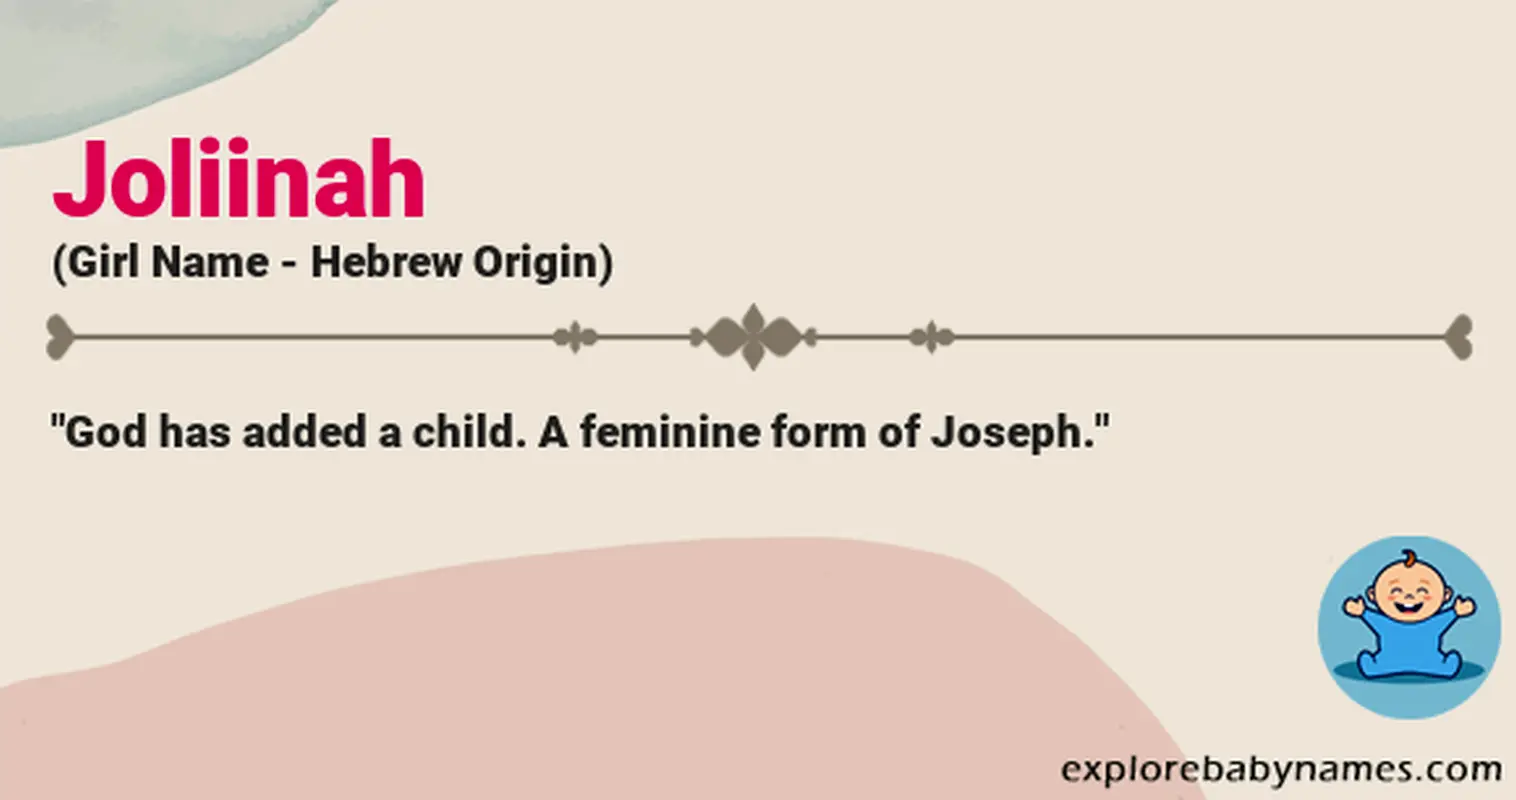 Meaning of Joliinah